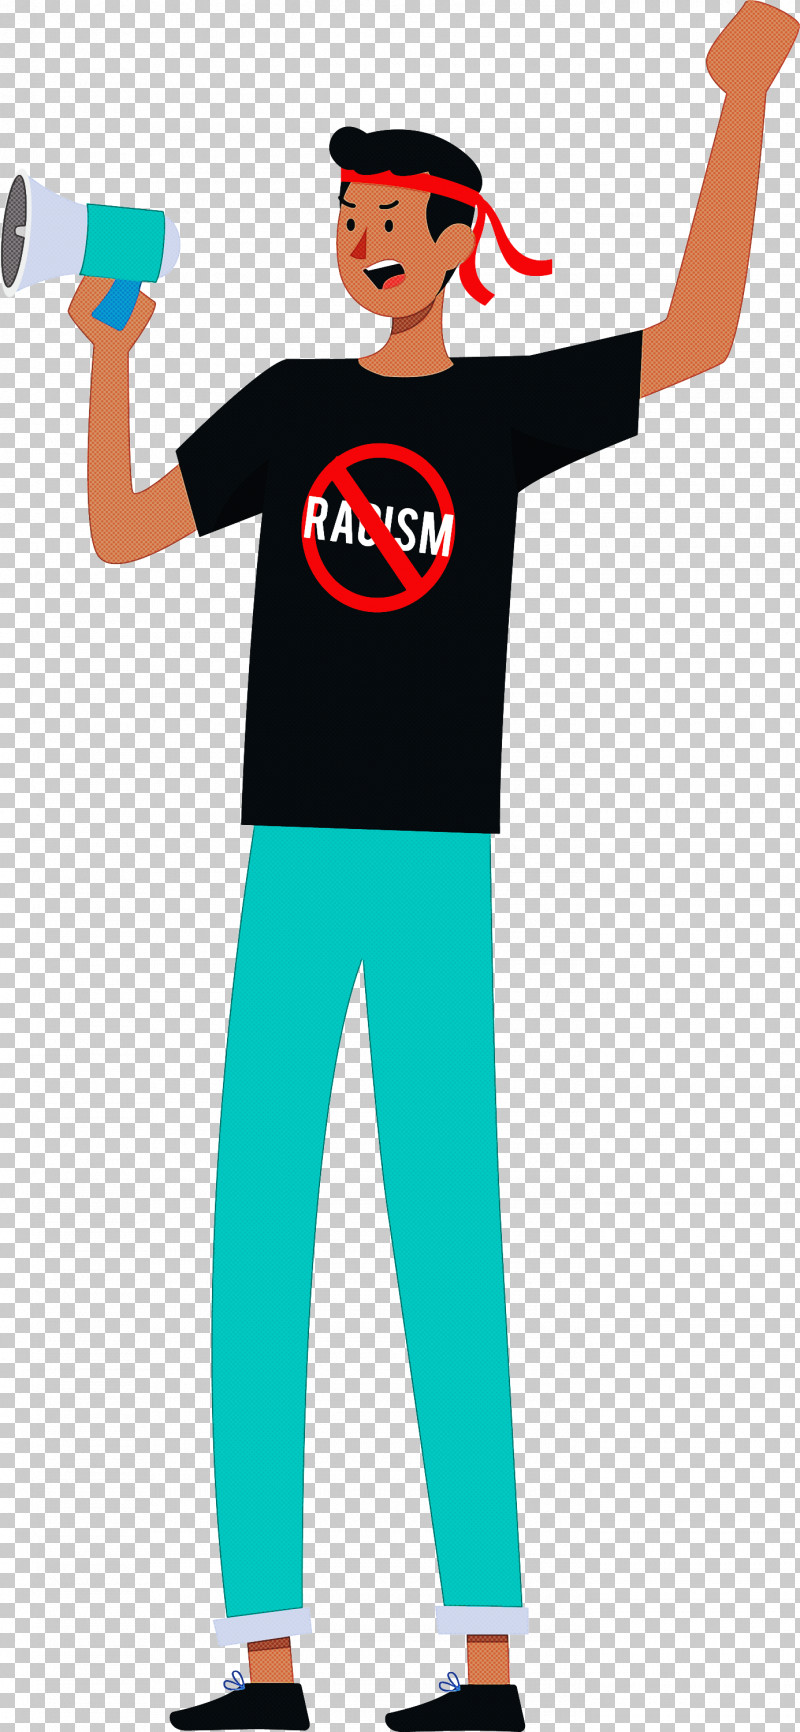 STOP RACISM PNG, Clipart, Book Illustration, Cartoon, Flat Design, Infographic, Stop Racism Free PNG Download